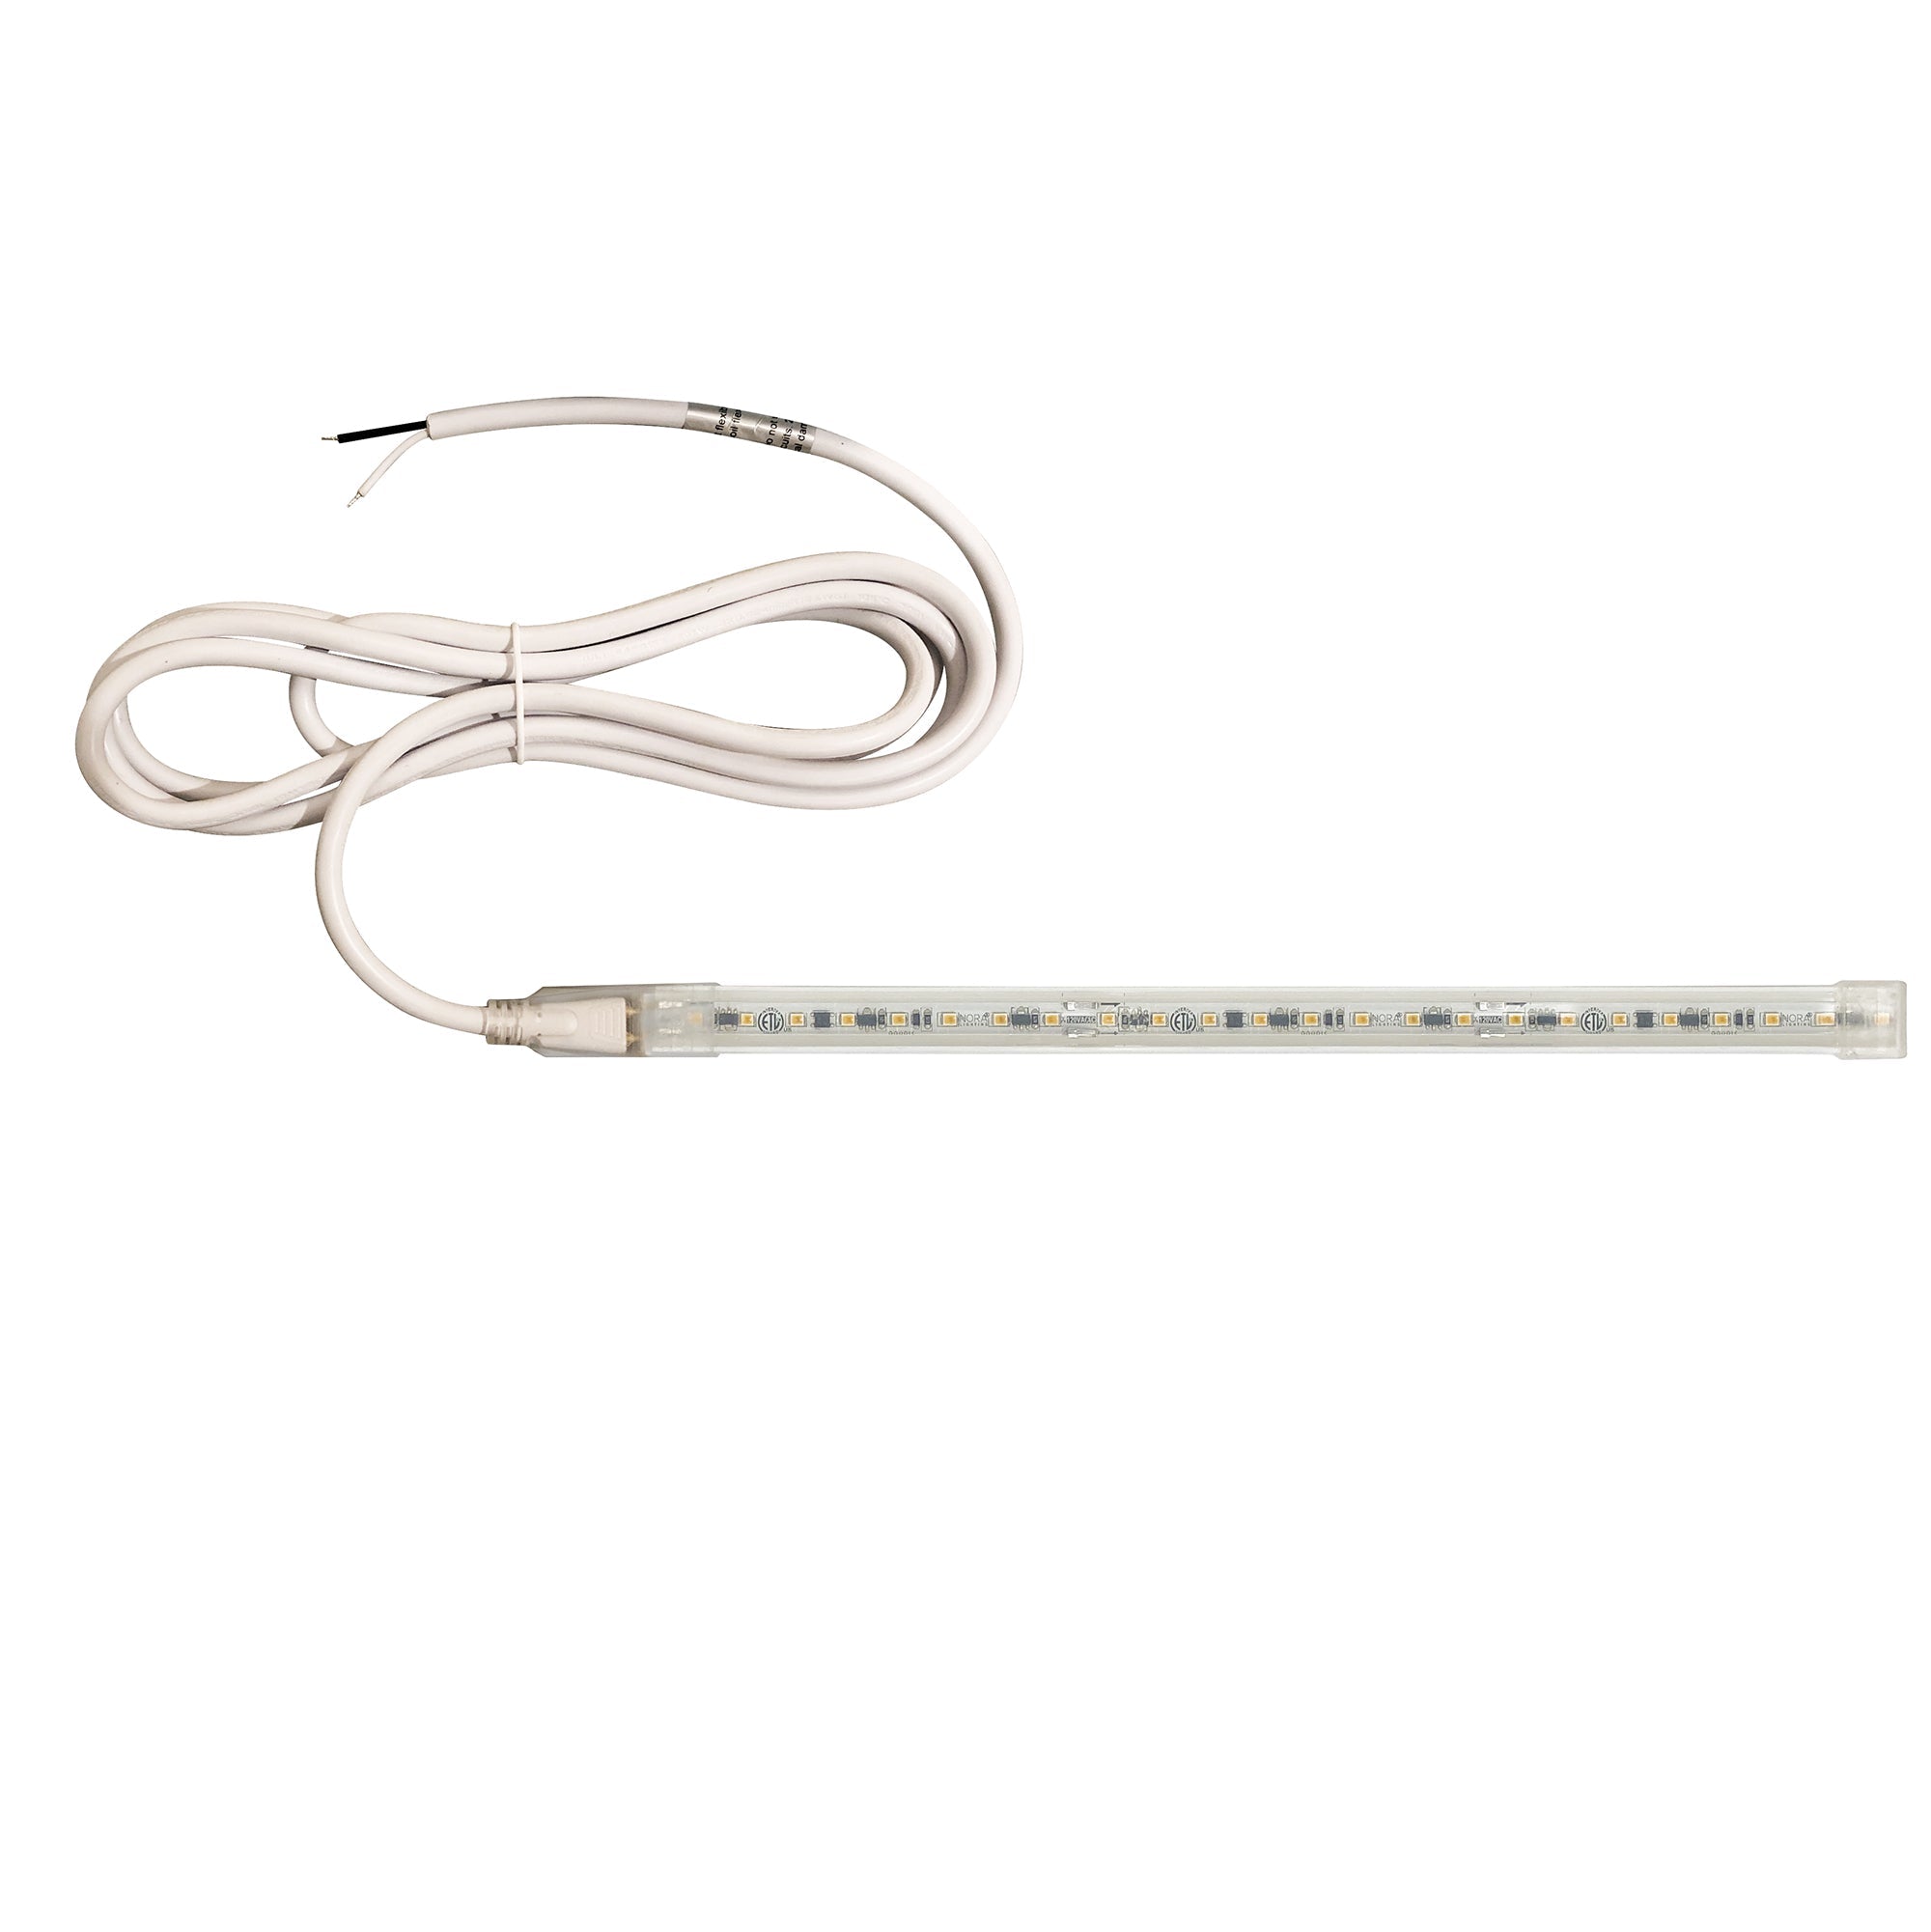 Nora Lighting NUTP13-W115-4-12-930/HW - Accent / Undercabinet - Custom Cut 115-ft, 4-in 120V Continuous LED Tape Light, 330lm / 3.6W per foot, 3000K, w/ Mounting Clips and 8' Hardwired Power Cord